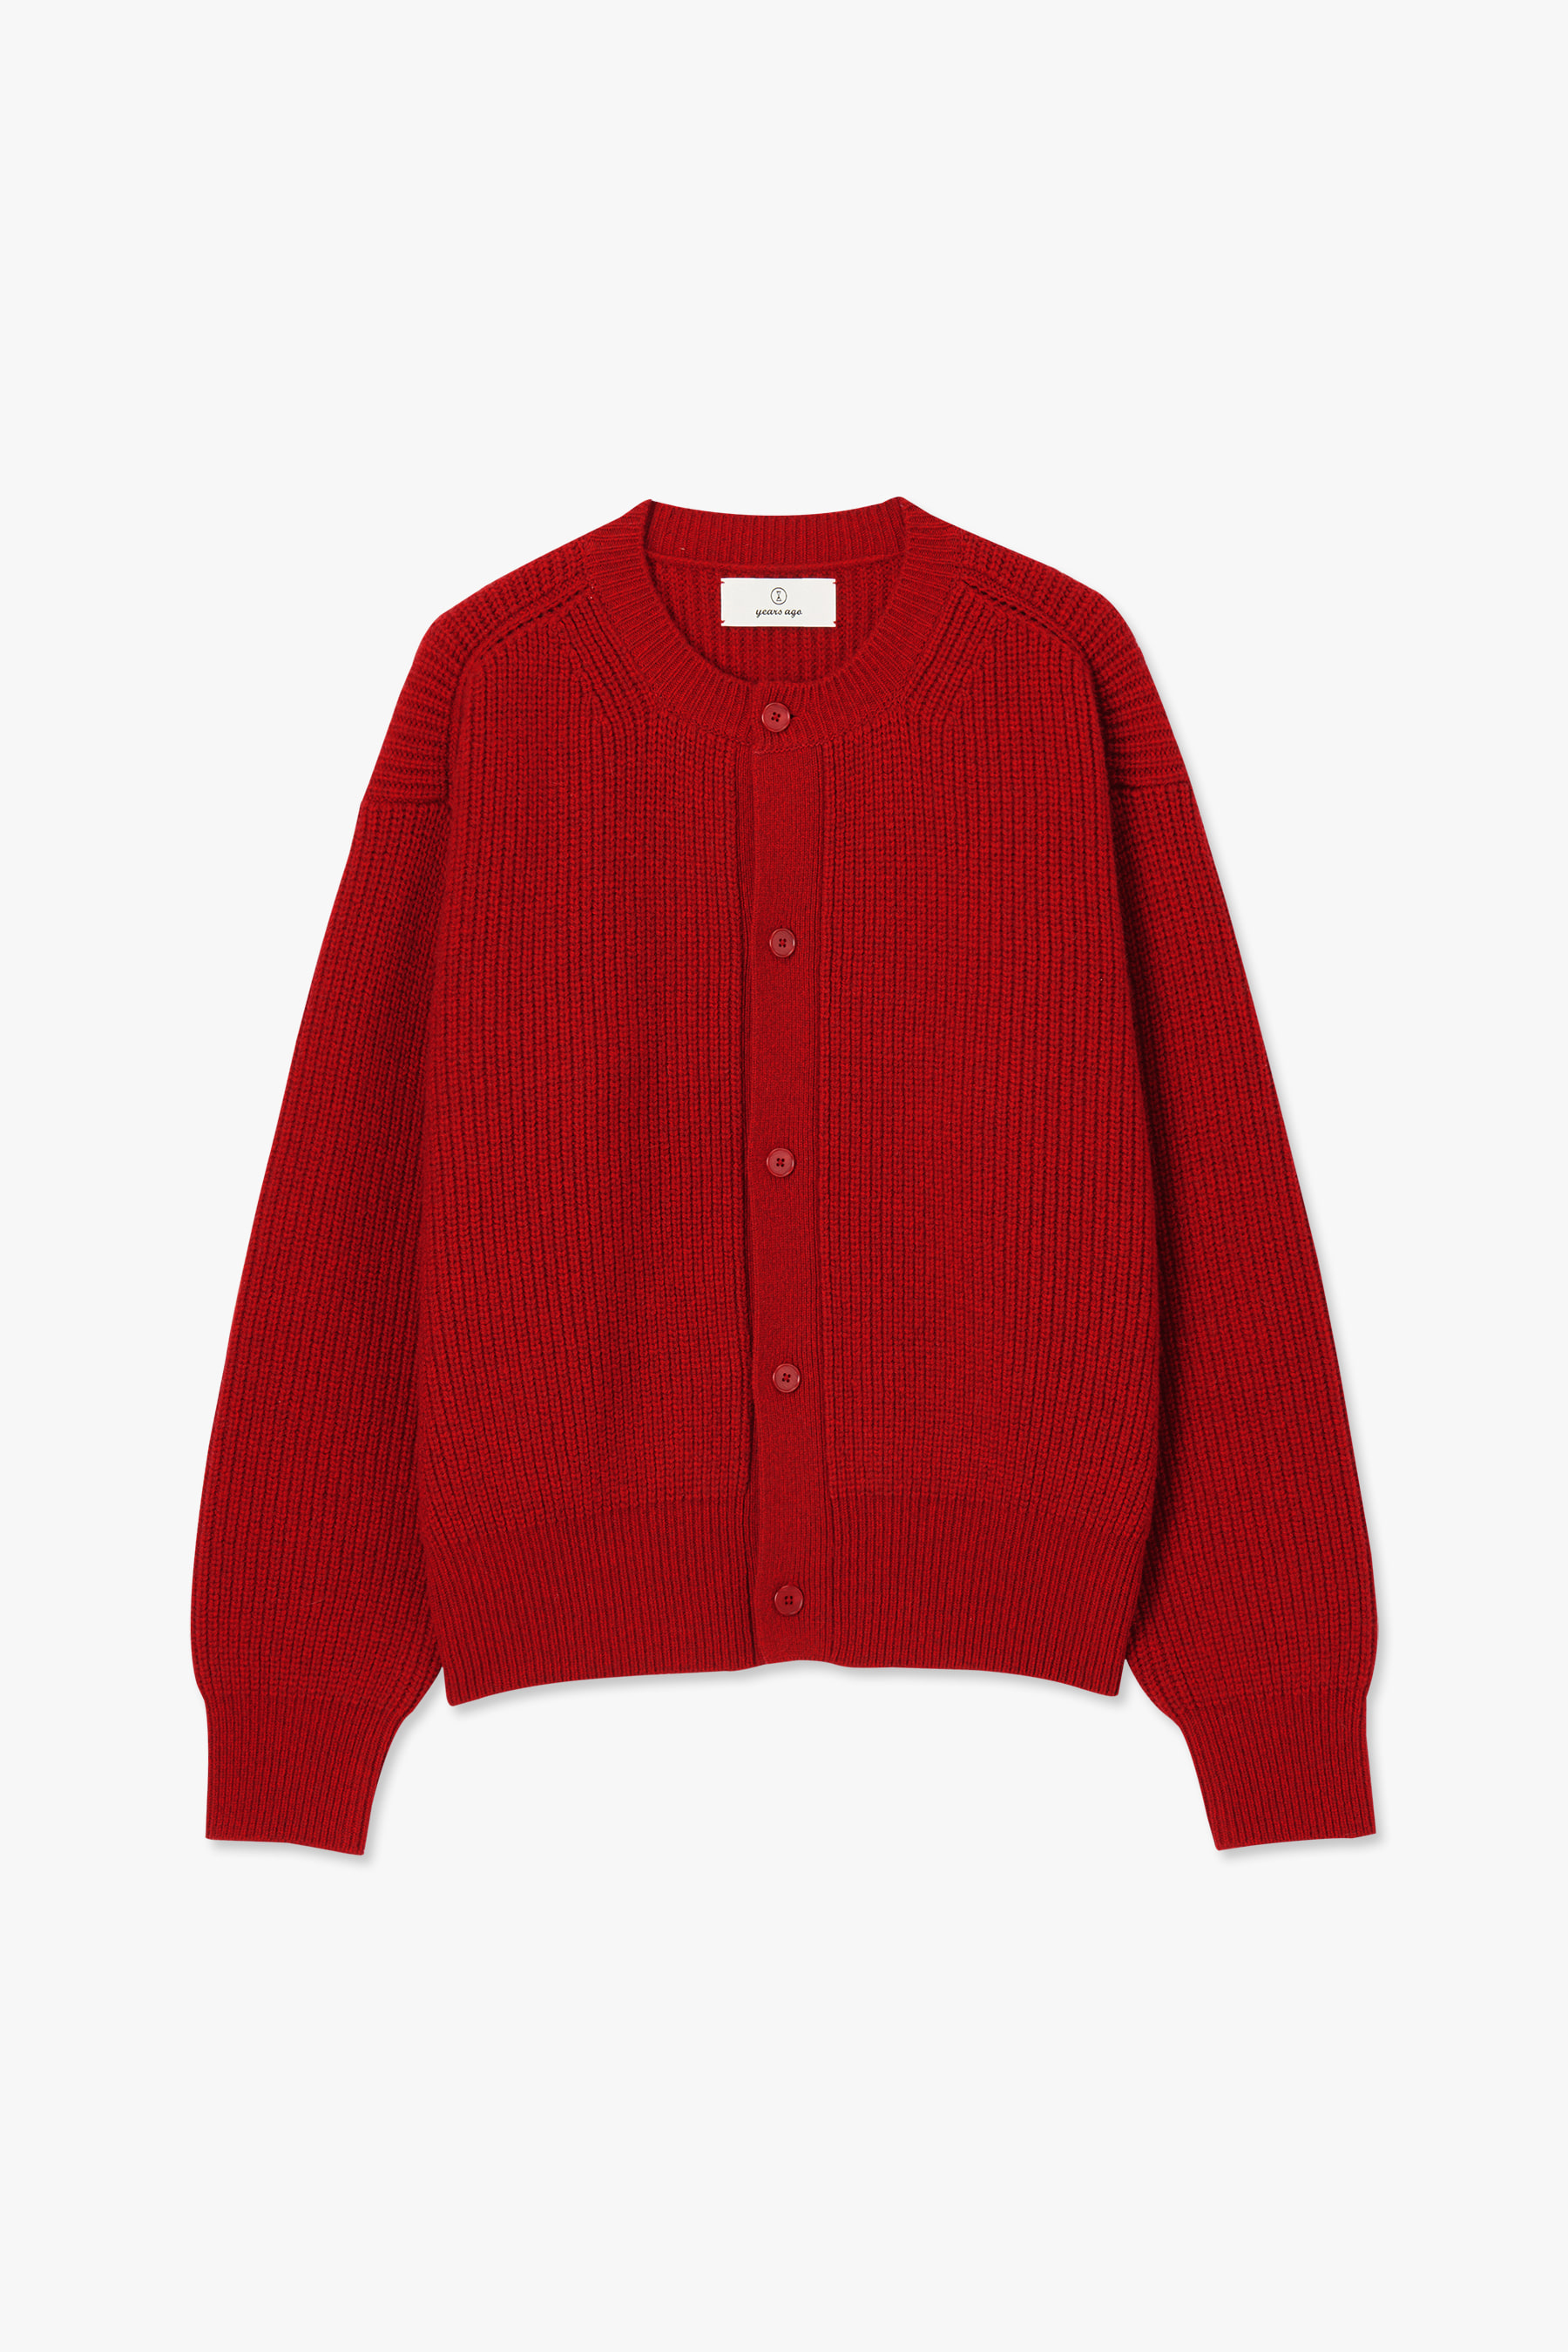 RED CLAY ROVER WOOL KNIT JACKET 02